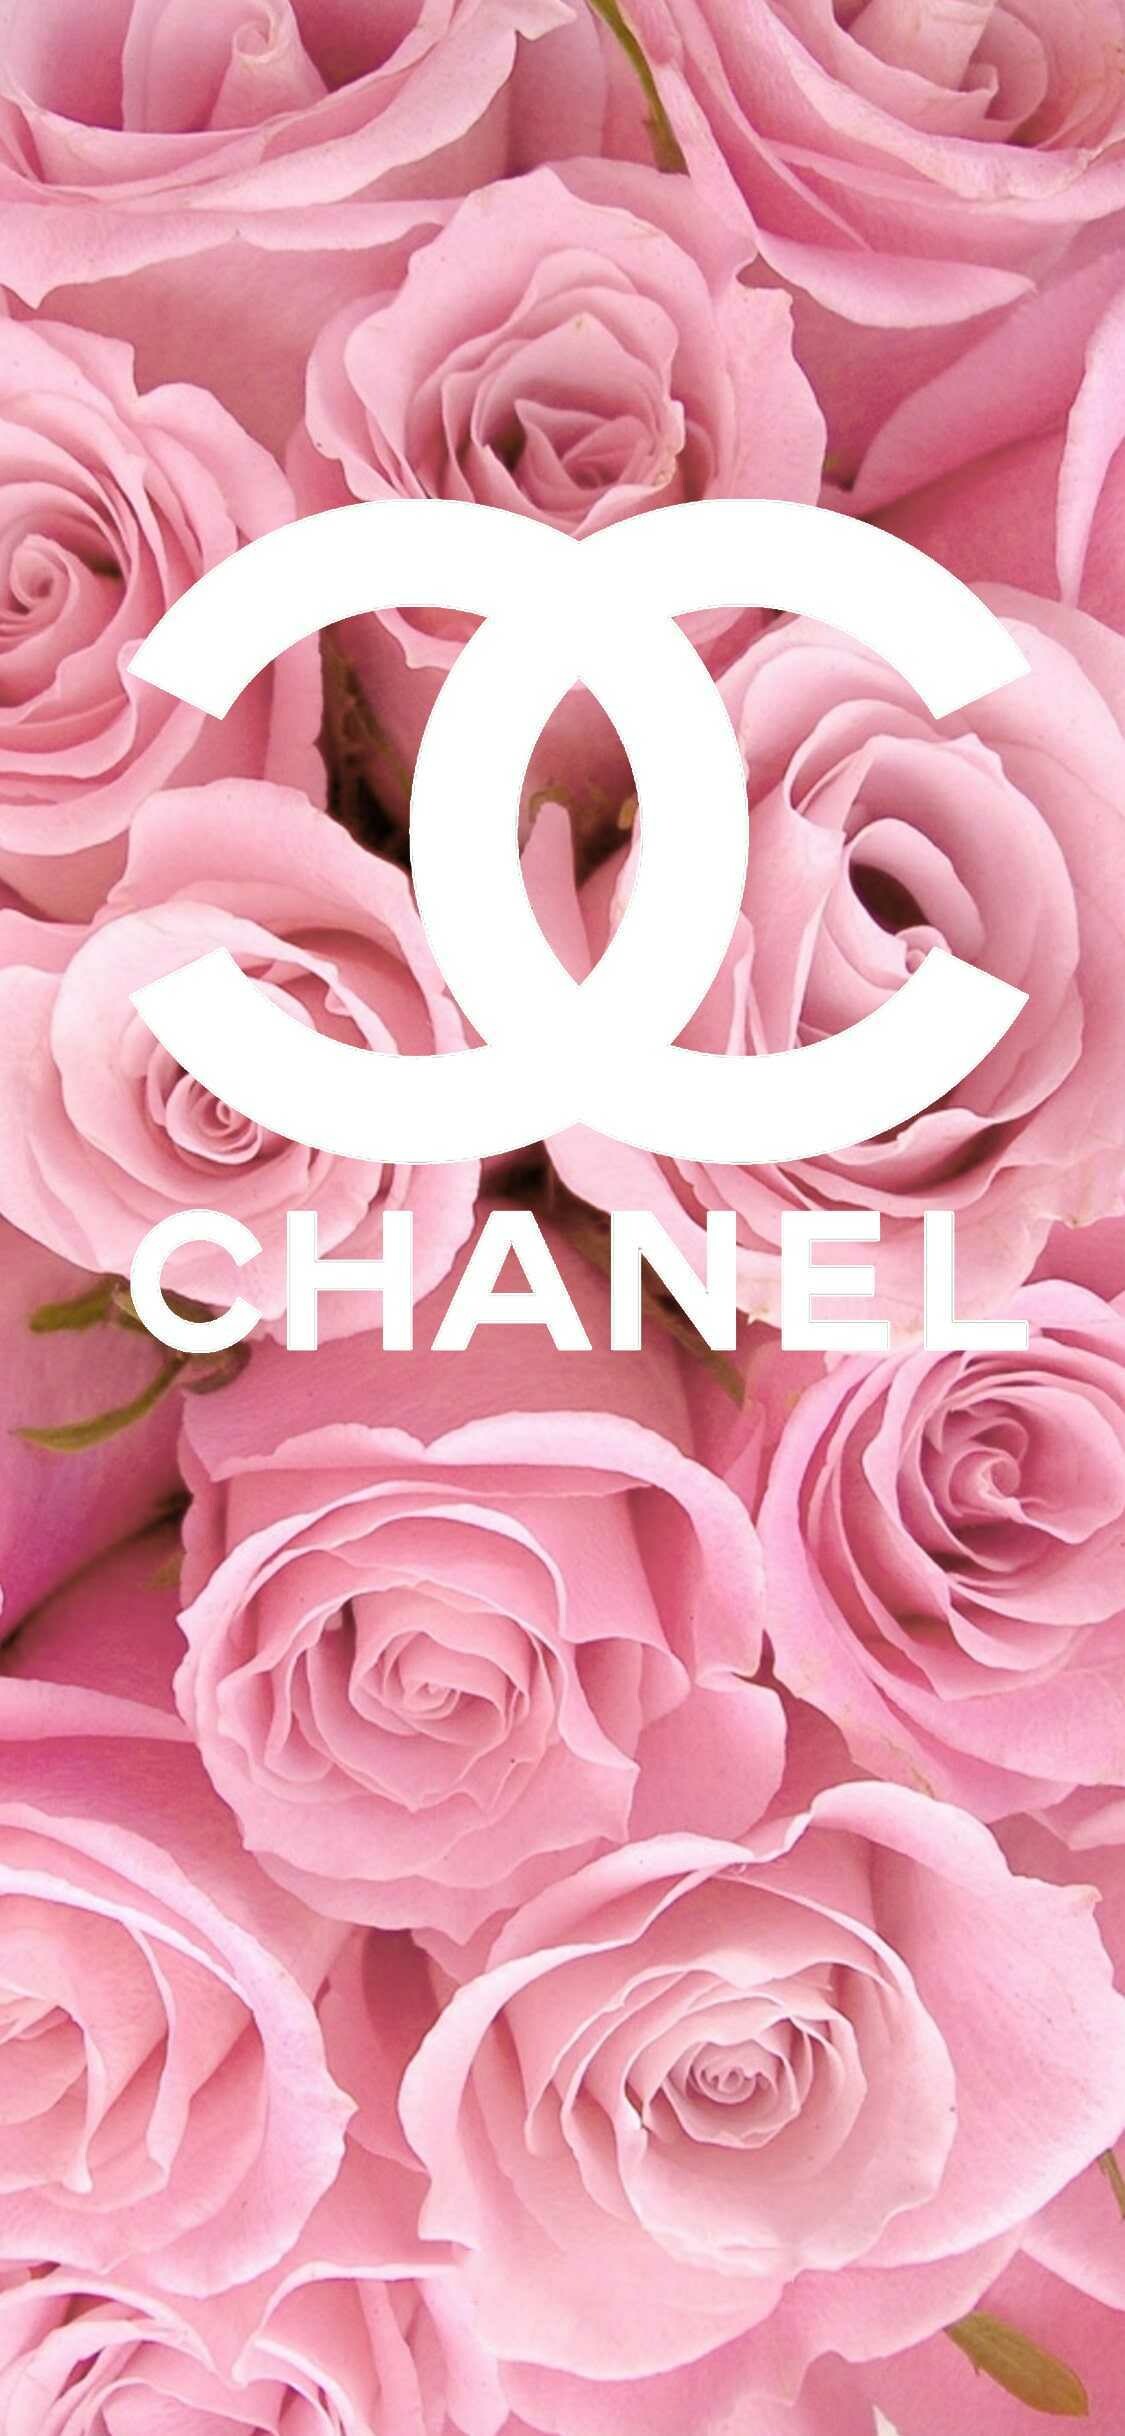 HD wallpaper, Crystal Clear, Chanel In 4K, 1130X2440 Hd Phone, Exquisite Details, Iphone Hd Chanel Wallpaper, Ultra High Resolution